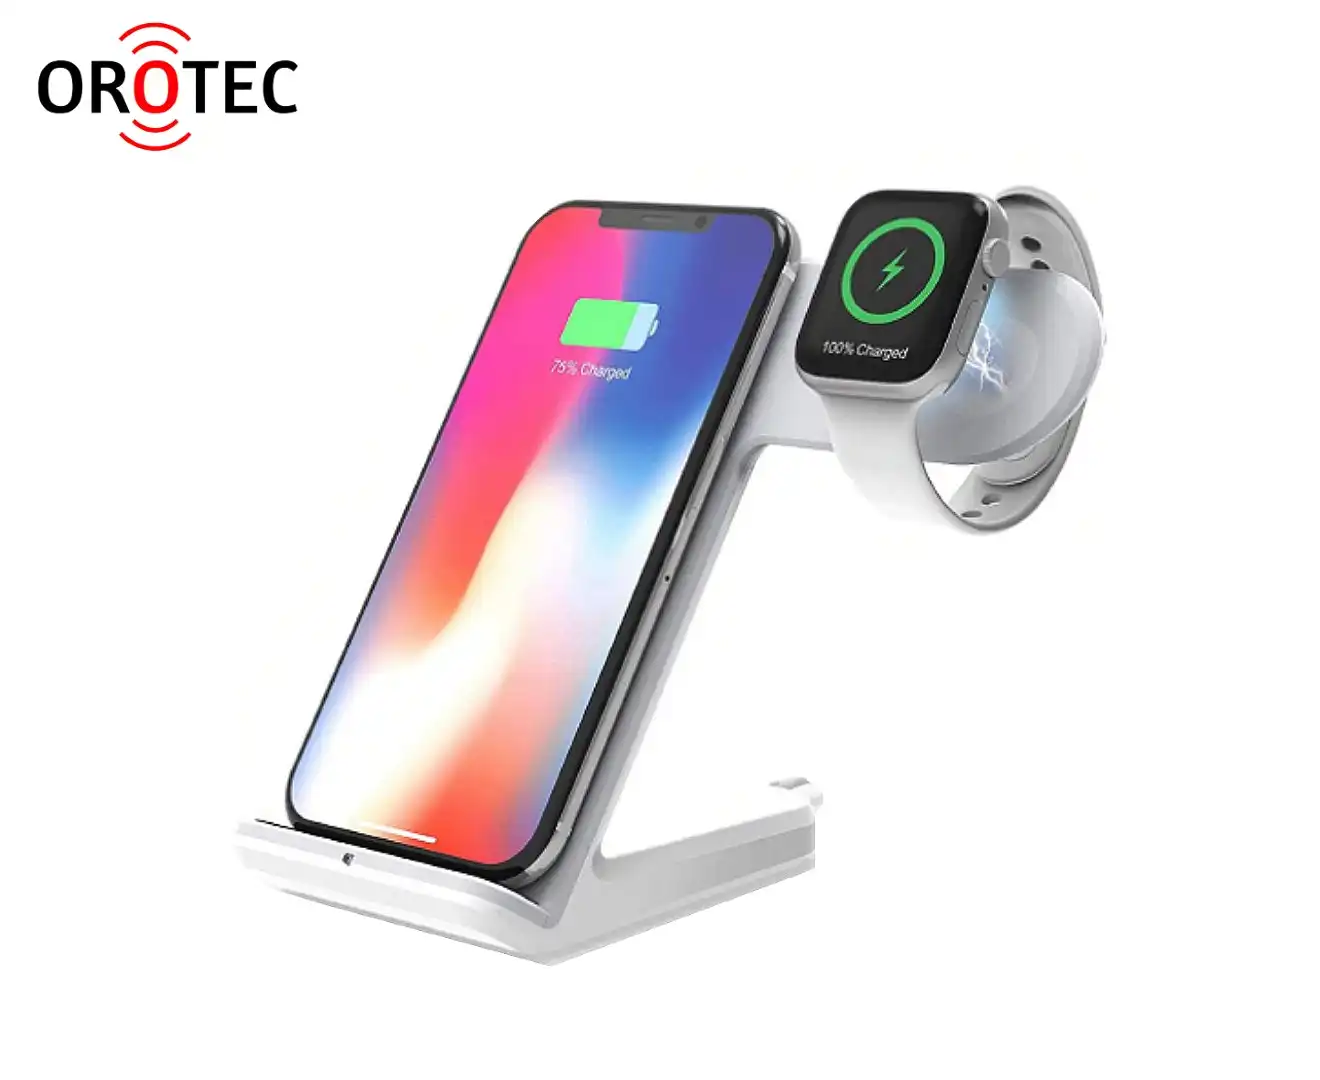 Orotec 10W 2-in-1 Dual Wireless Charging Dock Made for Apple (including Apple Watch Charging) White